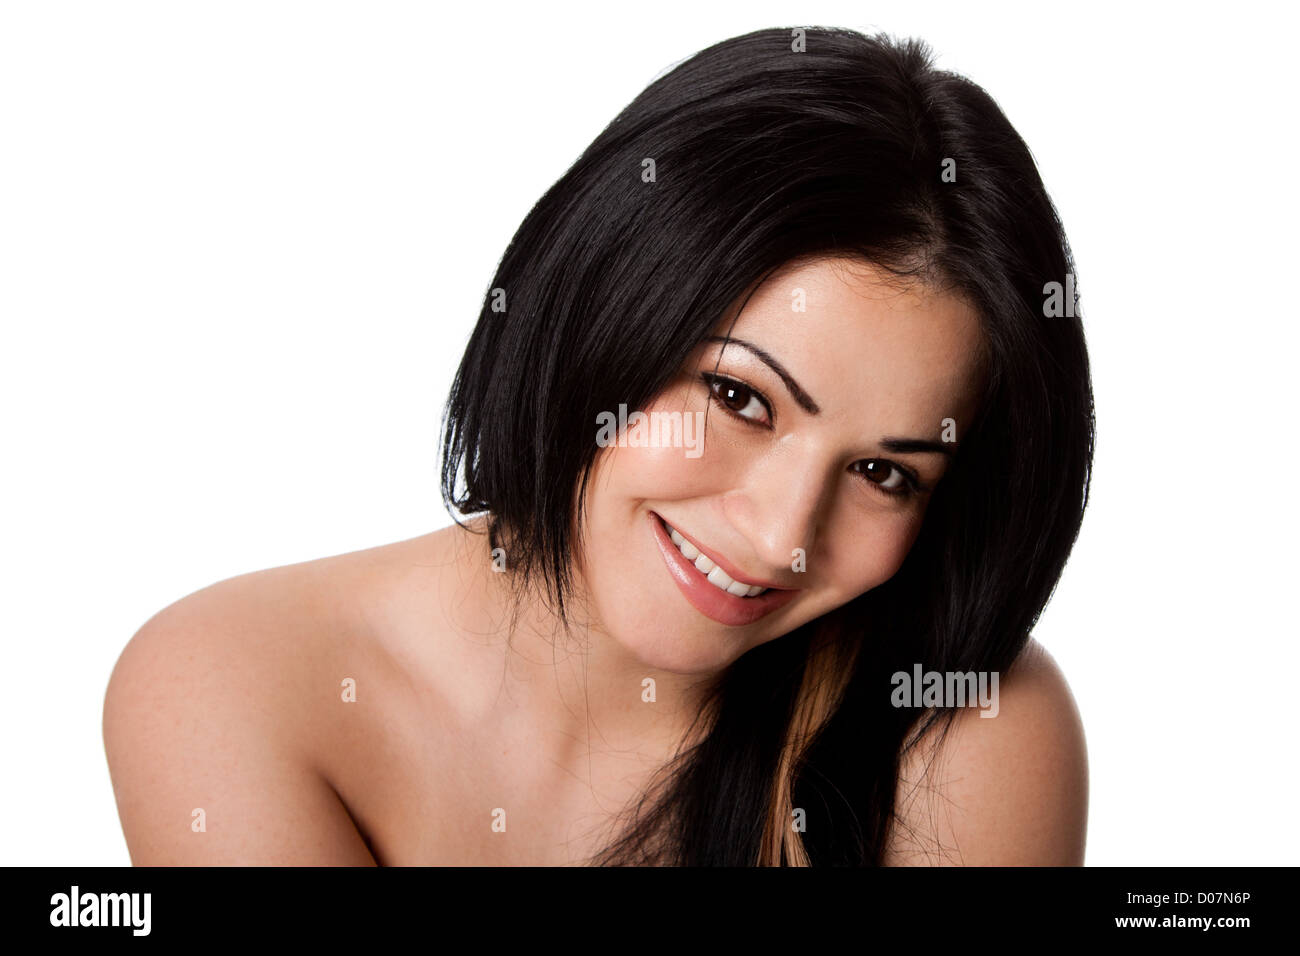 Beautiful attractive happy smiling young woman with perfect fair skin and long black hair, isolated. Stock Photo